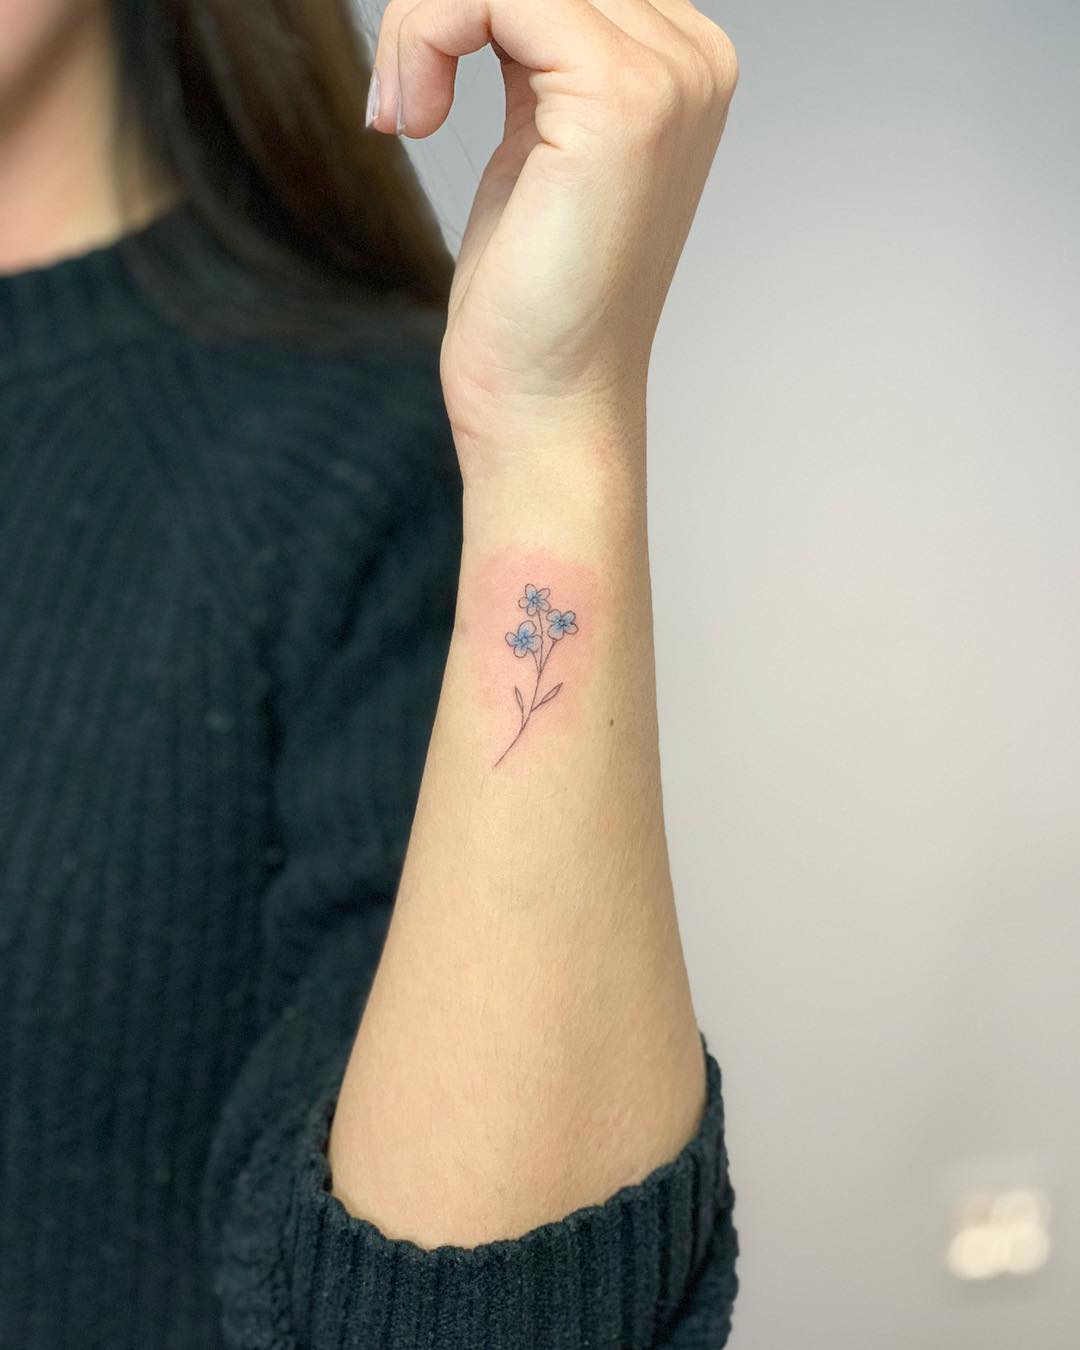 tiny side wrist tattoo designs to try